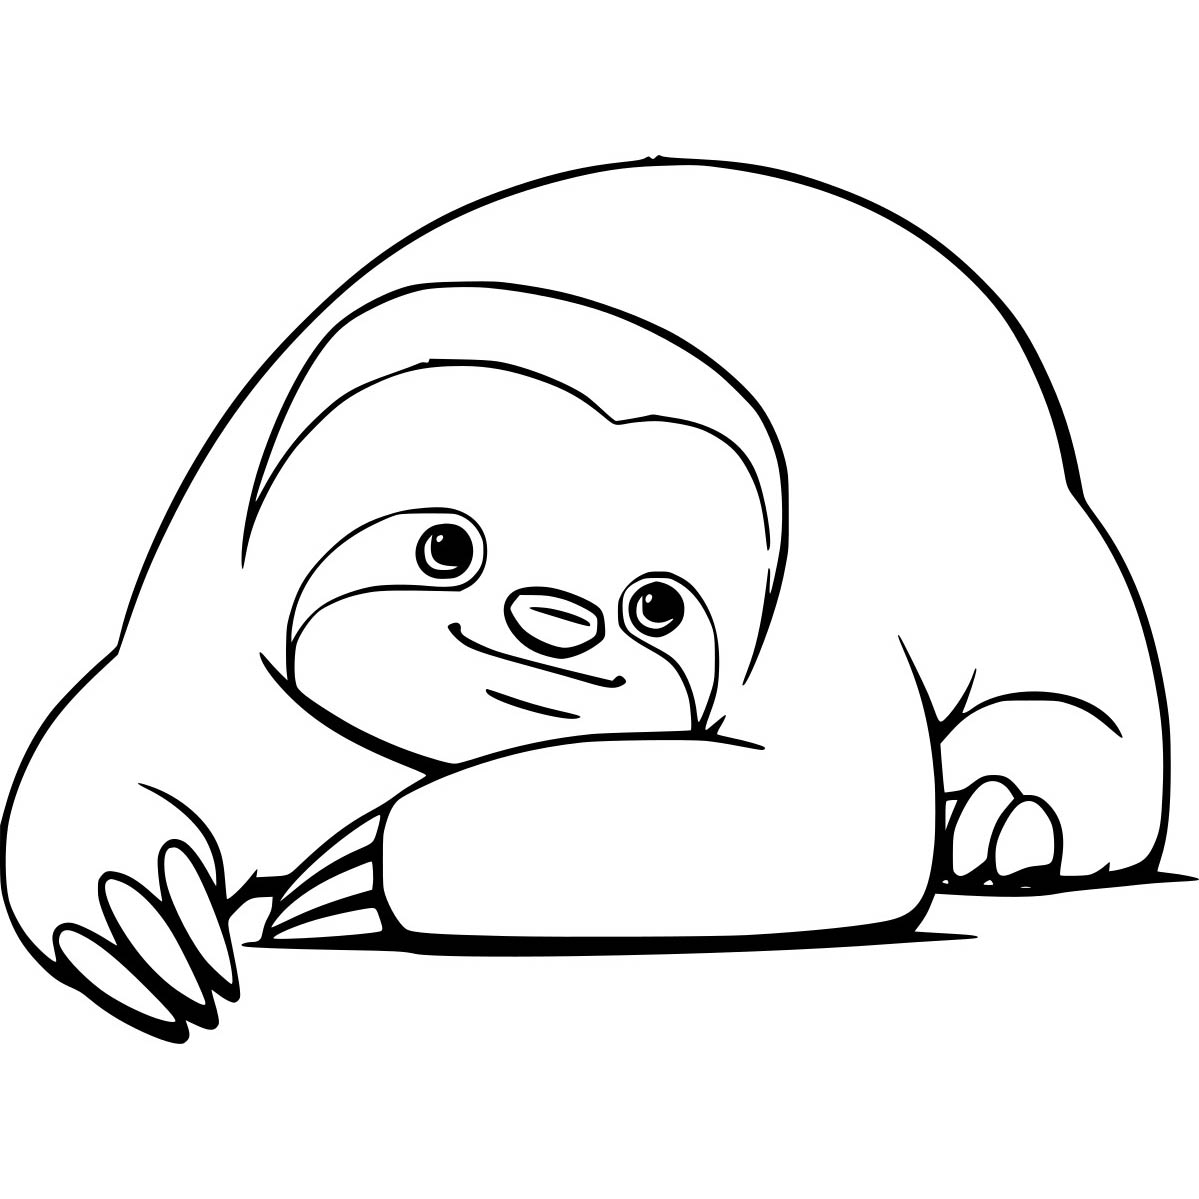 Free Cute Sloth Coloring Pages printable